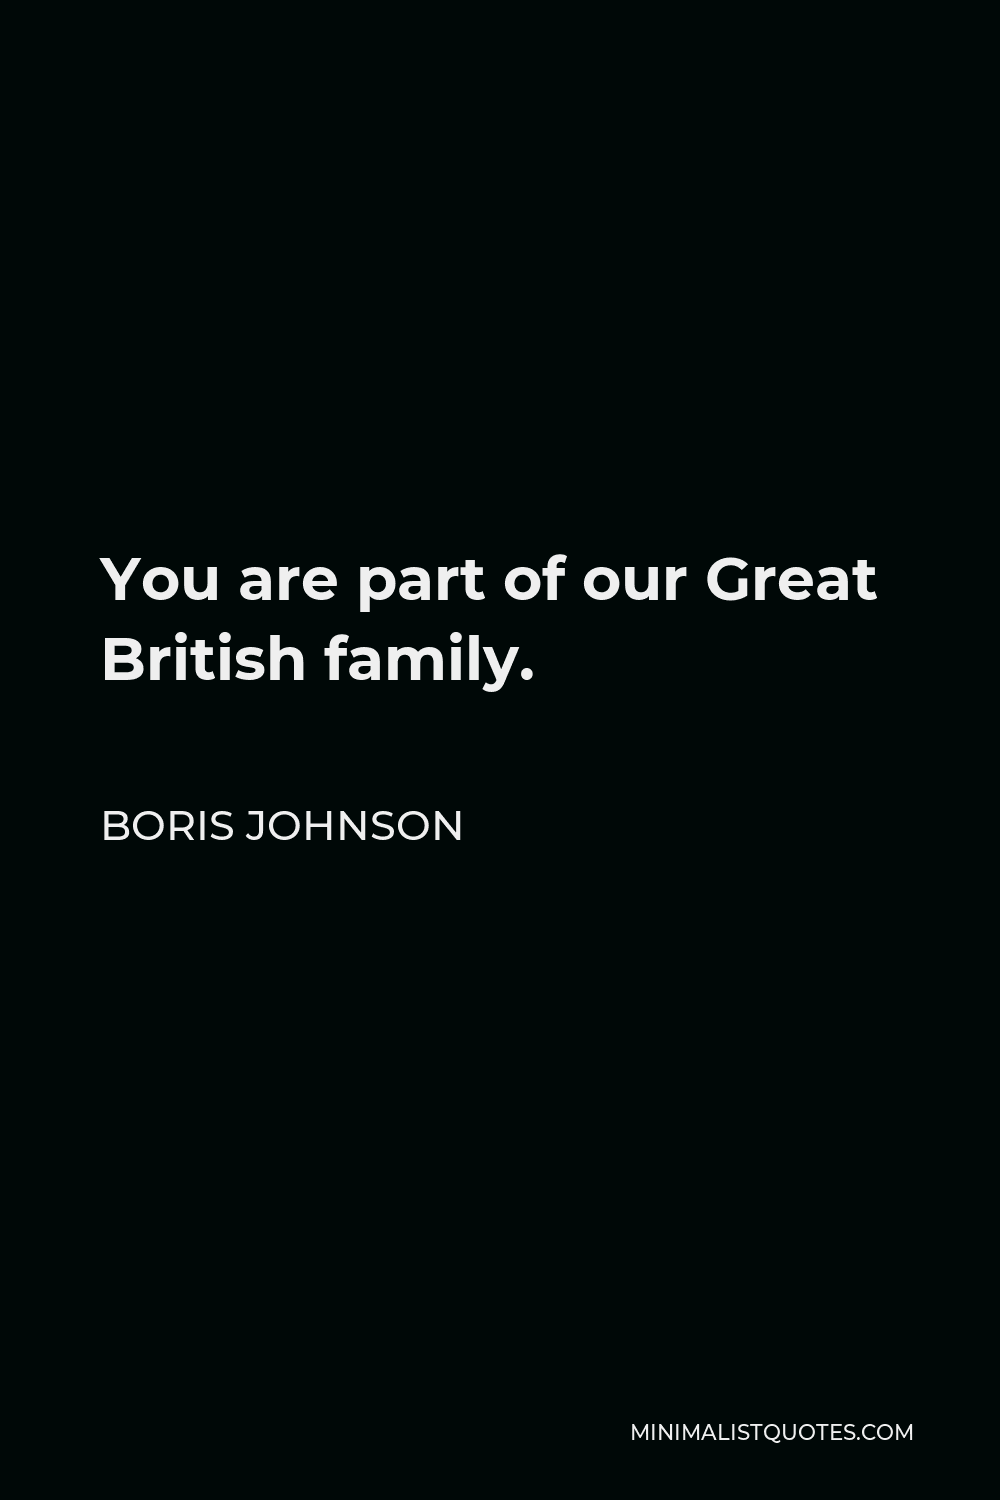 Boris Johnson Quote - You are part of our Great British family.